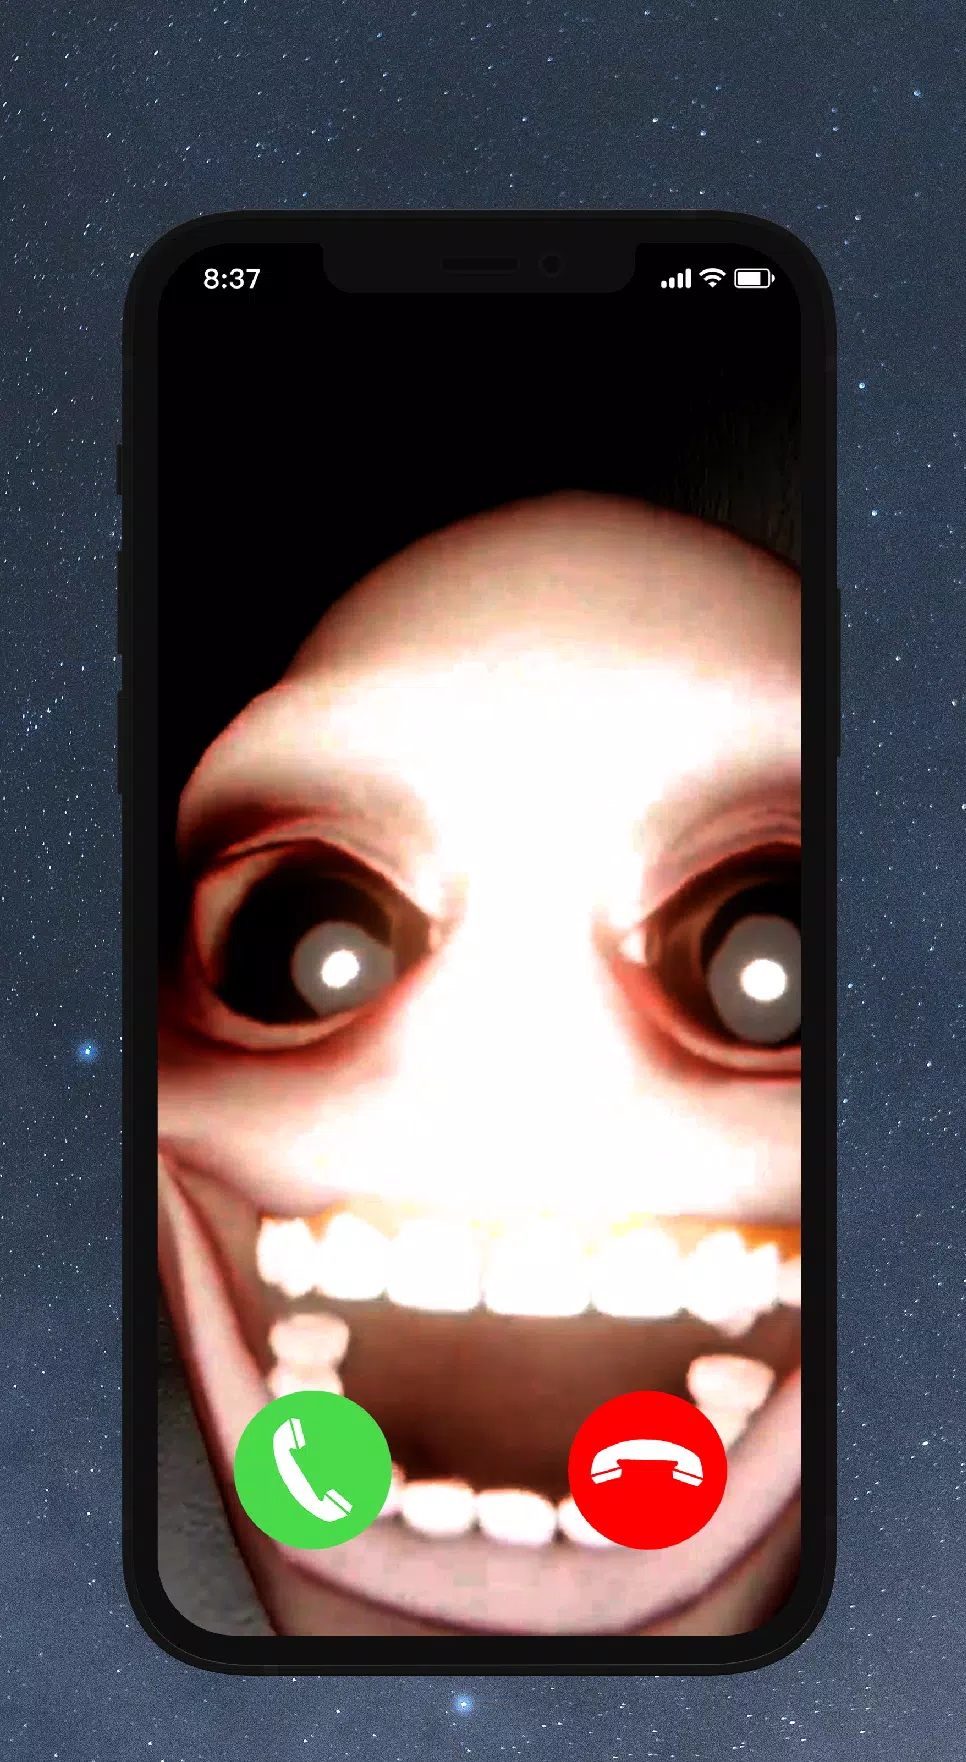 Fake video call horror 666 gam - Apps on Google Play